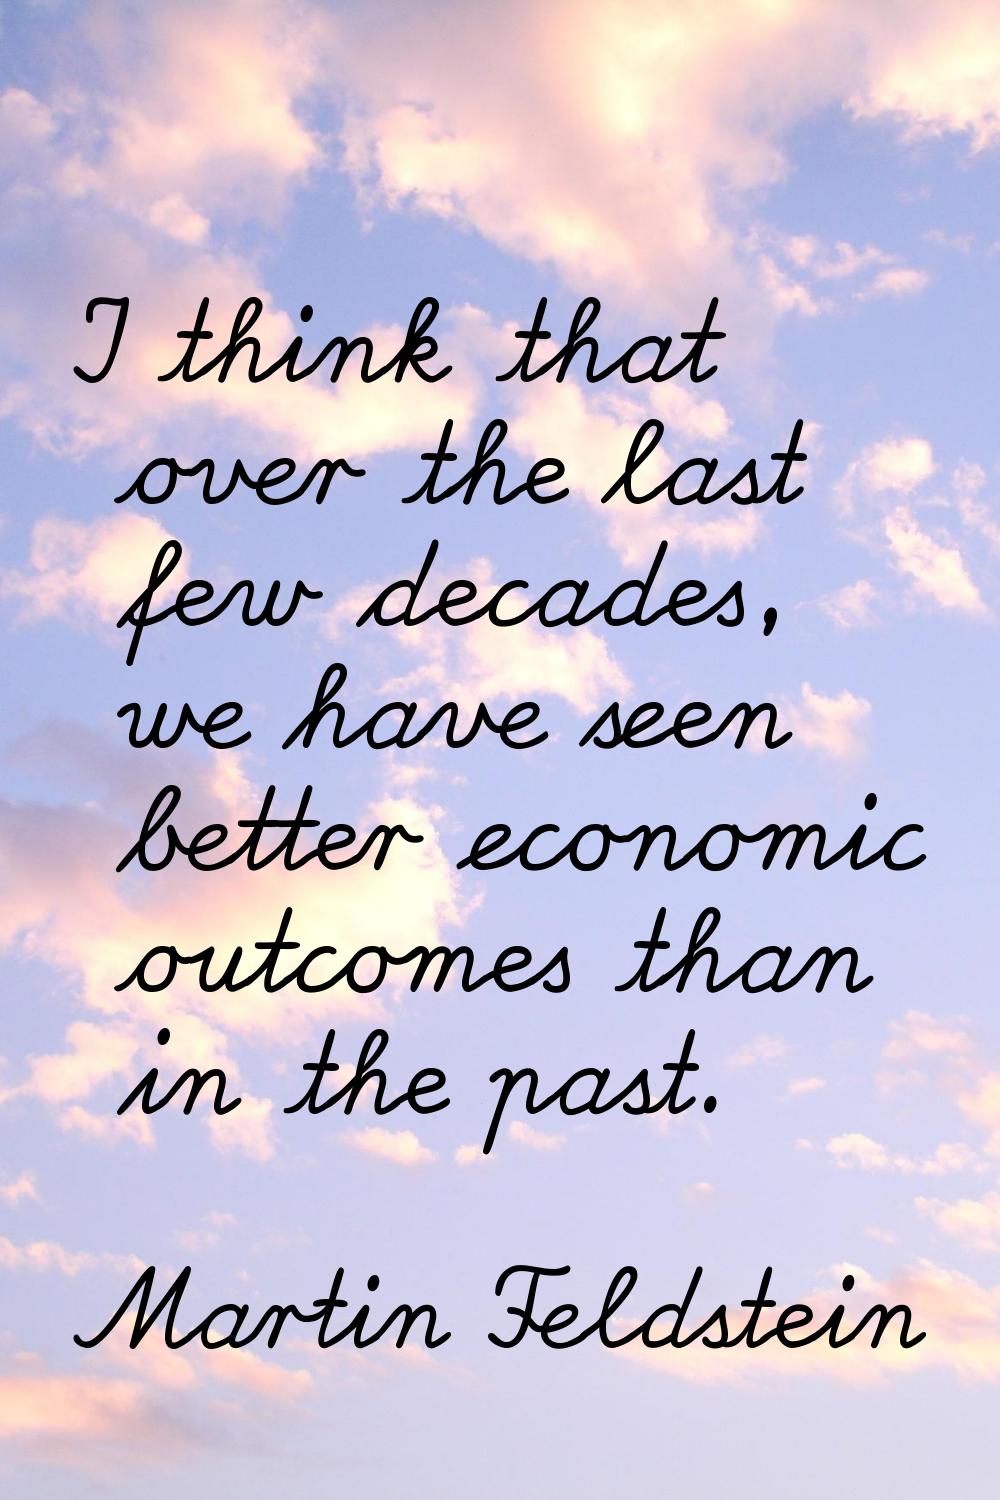 I think that over the last few decades, we have seen better economic outcomes than in the past.